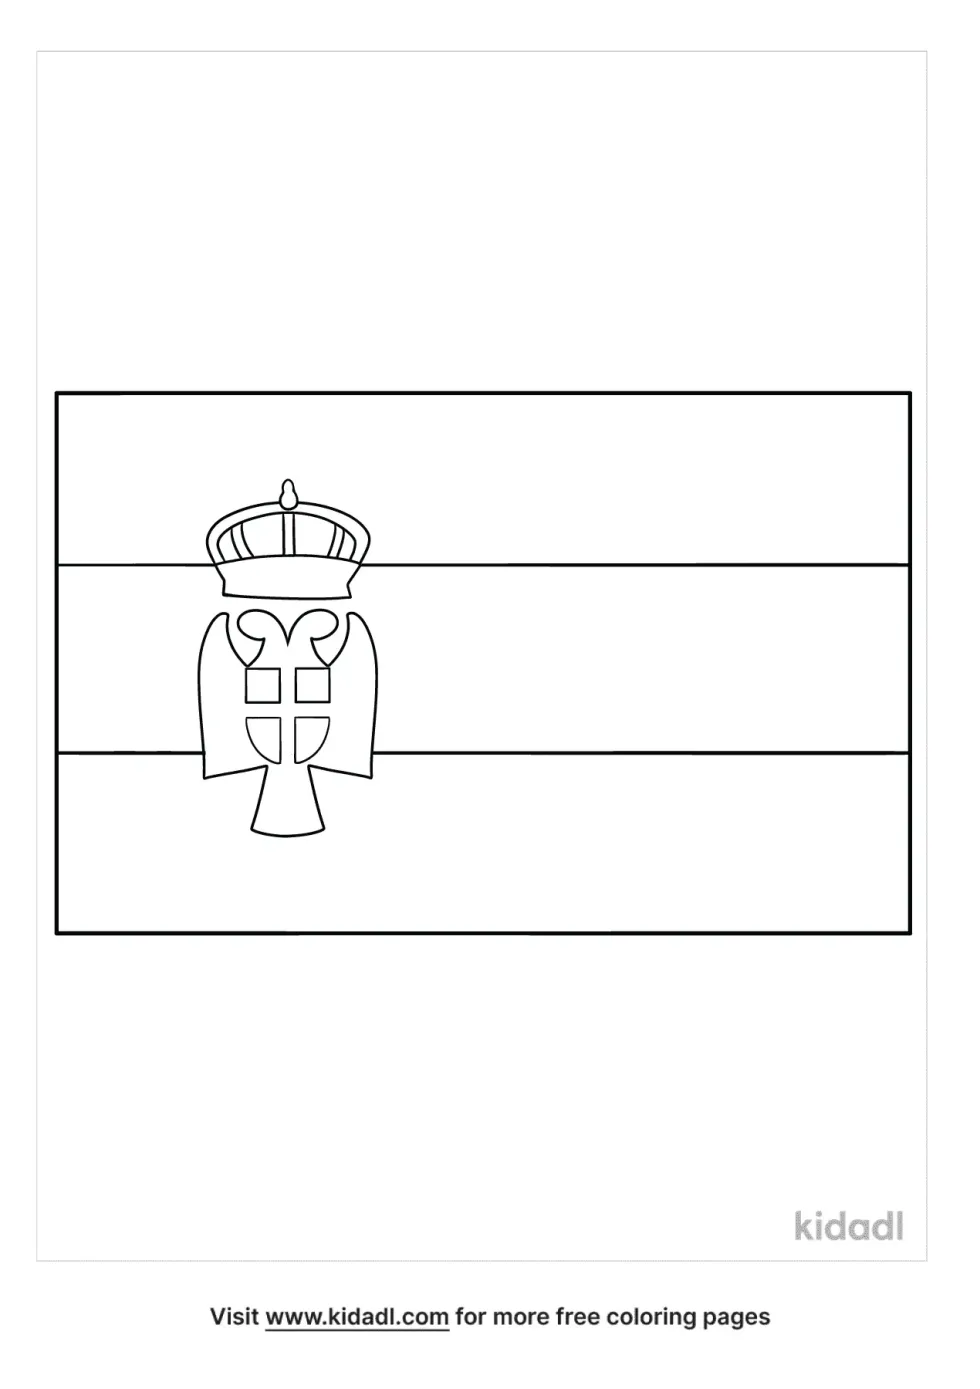 Serbia Coloring Page